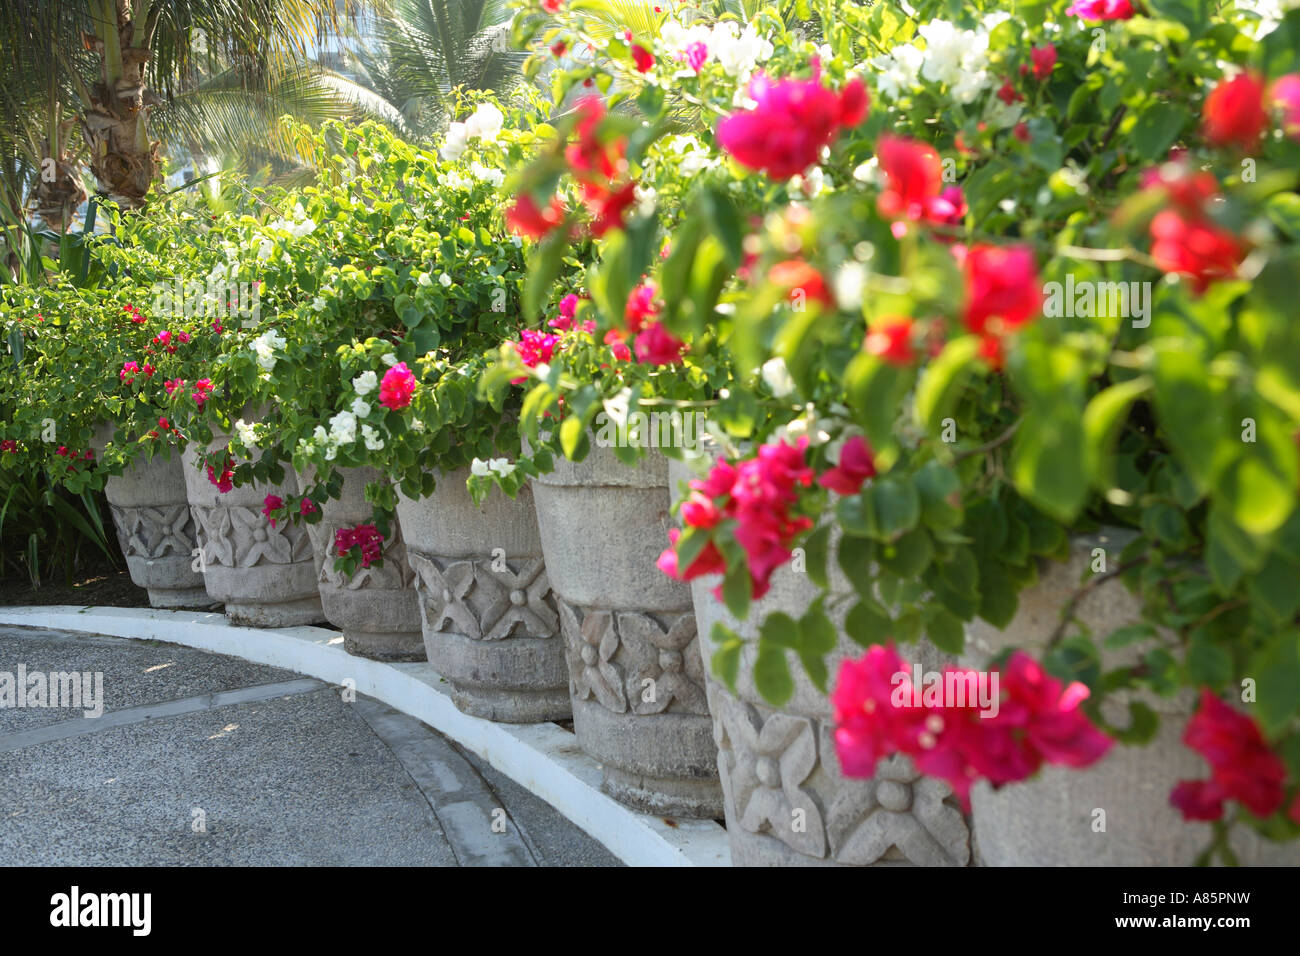 Flowers in stone pots Acapulco, Mexico Stock Photo